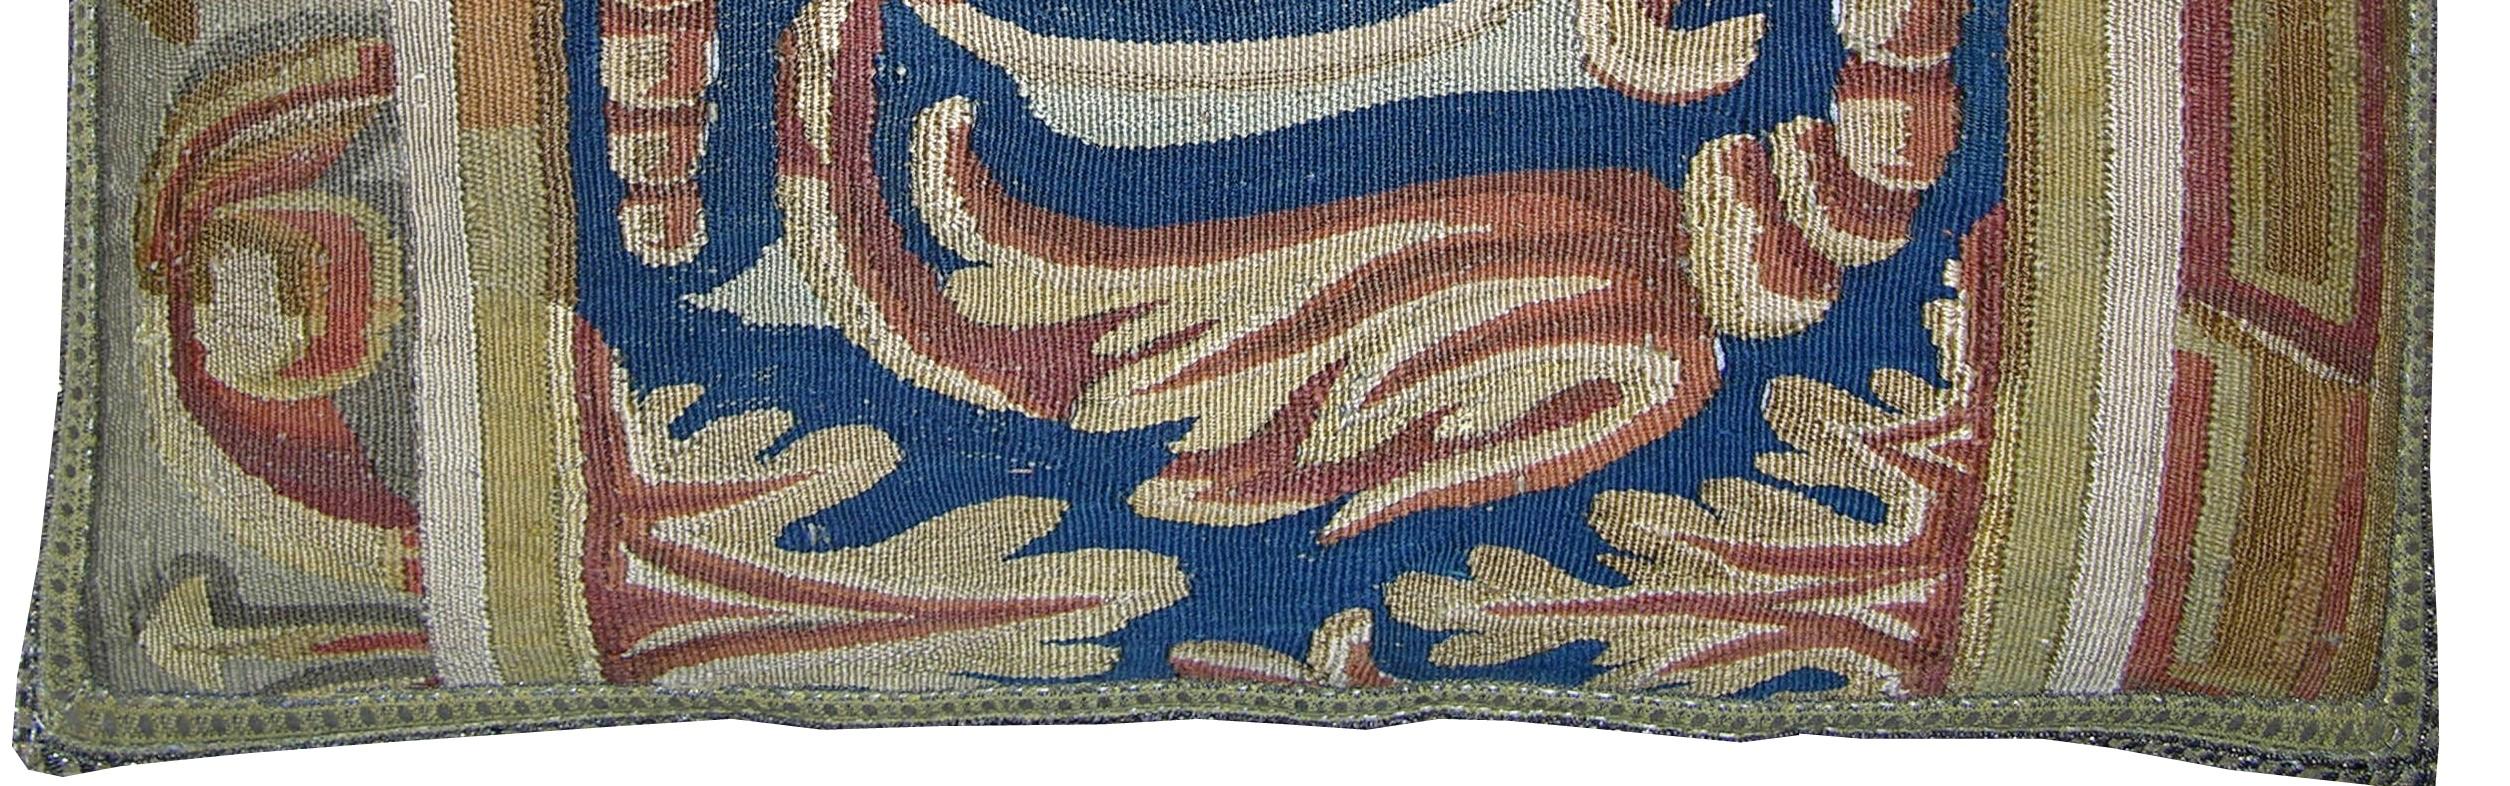 Belgian 17th Century Antique Brussels Tapestry Pillow For Sale